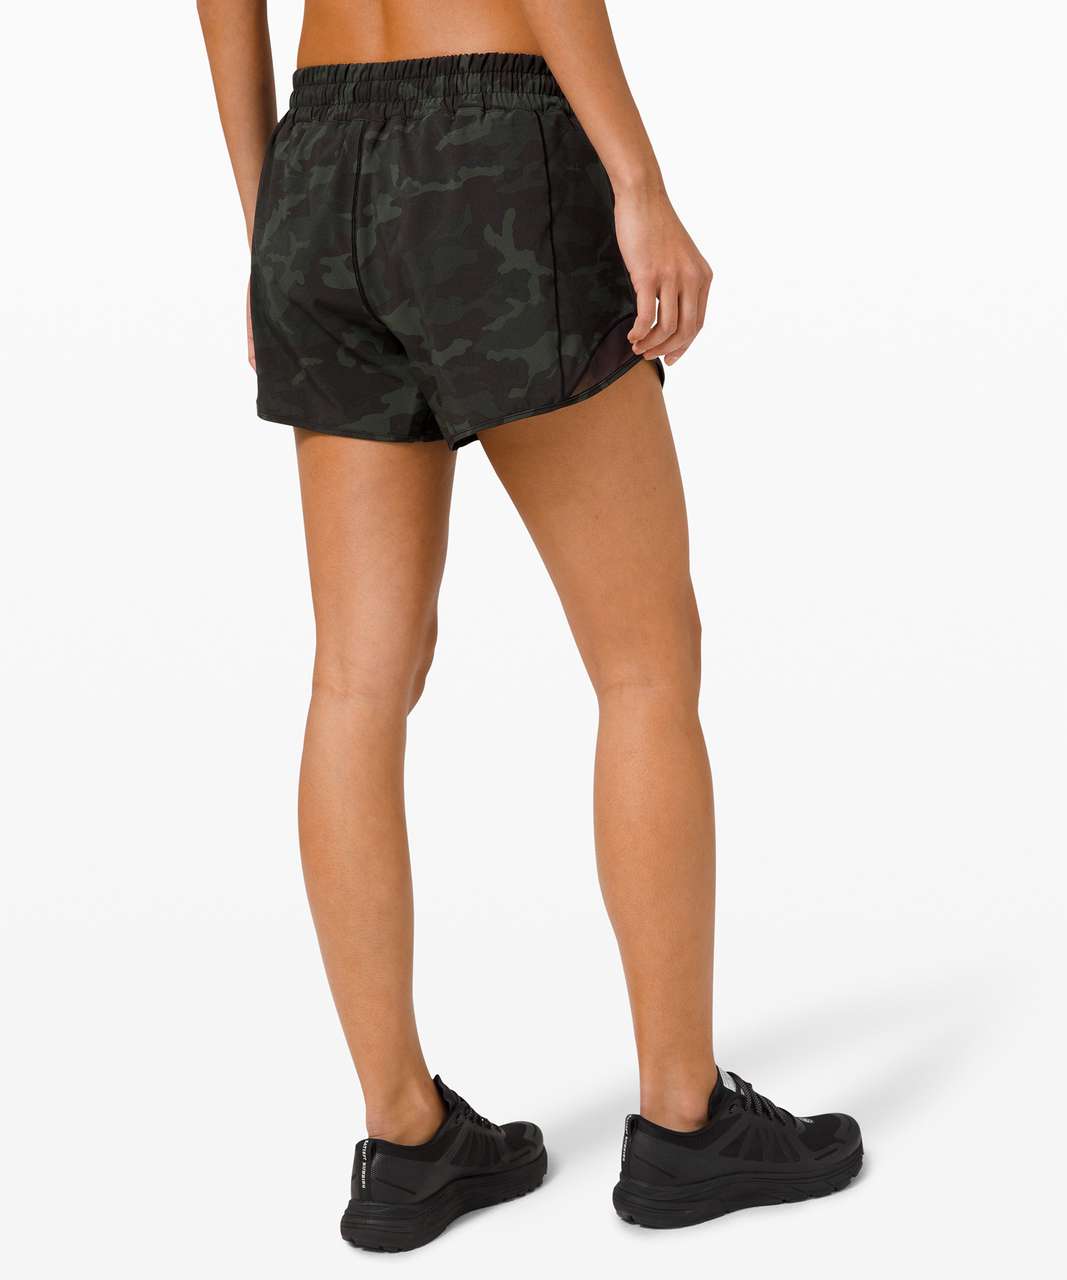 NWT SOLD-OUT Formation Camo Hotty Hot Shorts-Lululemon Sz 2 Tall- 4” Women  FCMD